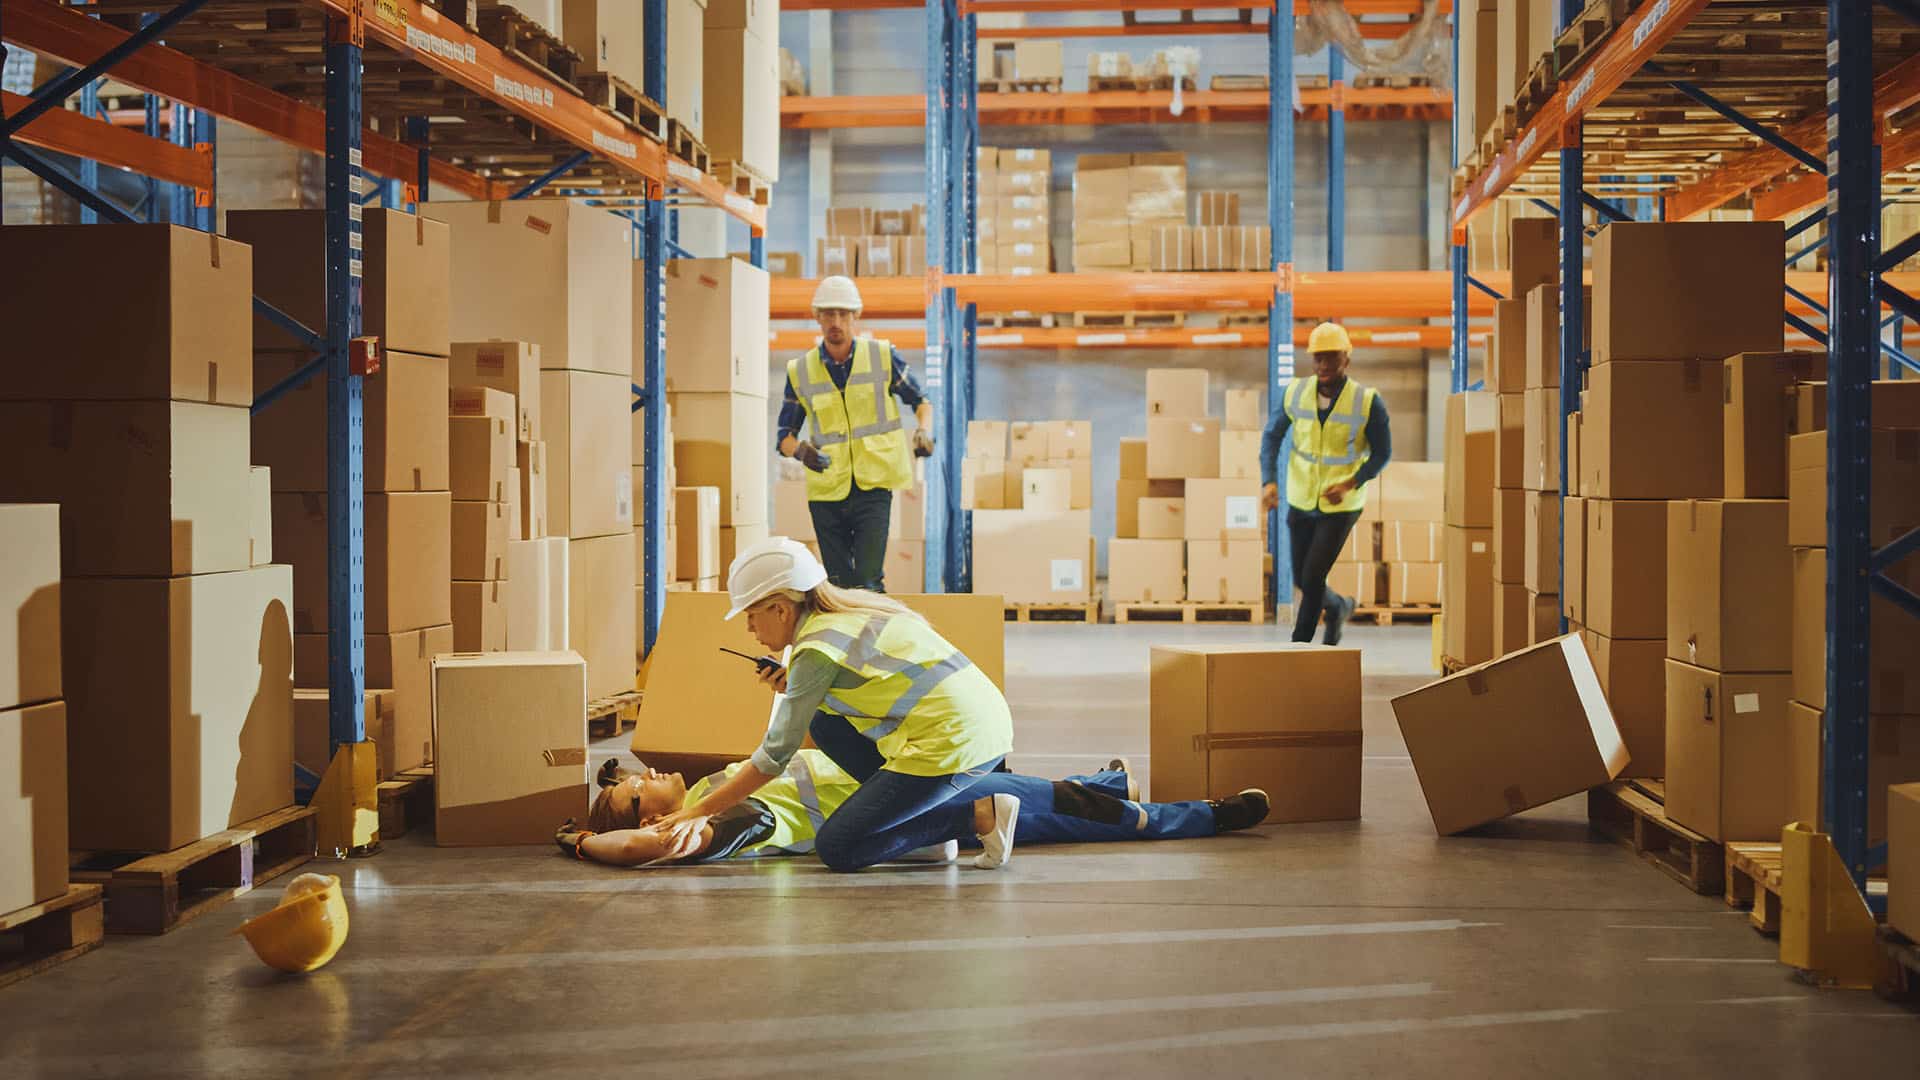 Warehouse worker has work related accident falls while trying to pick up cardboard box from the shelf.